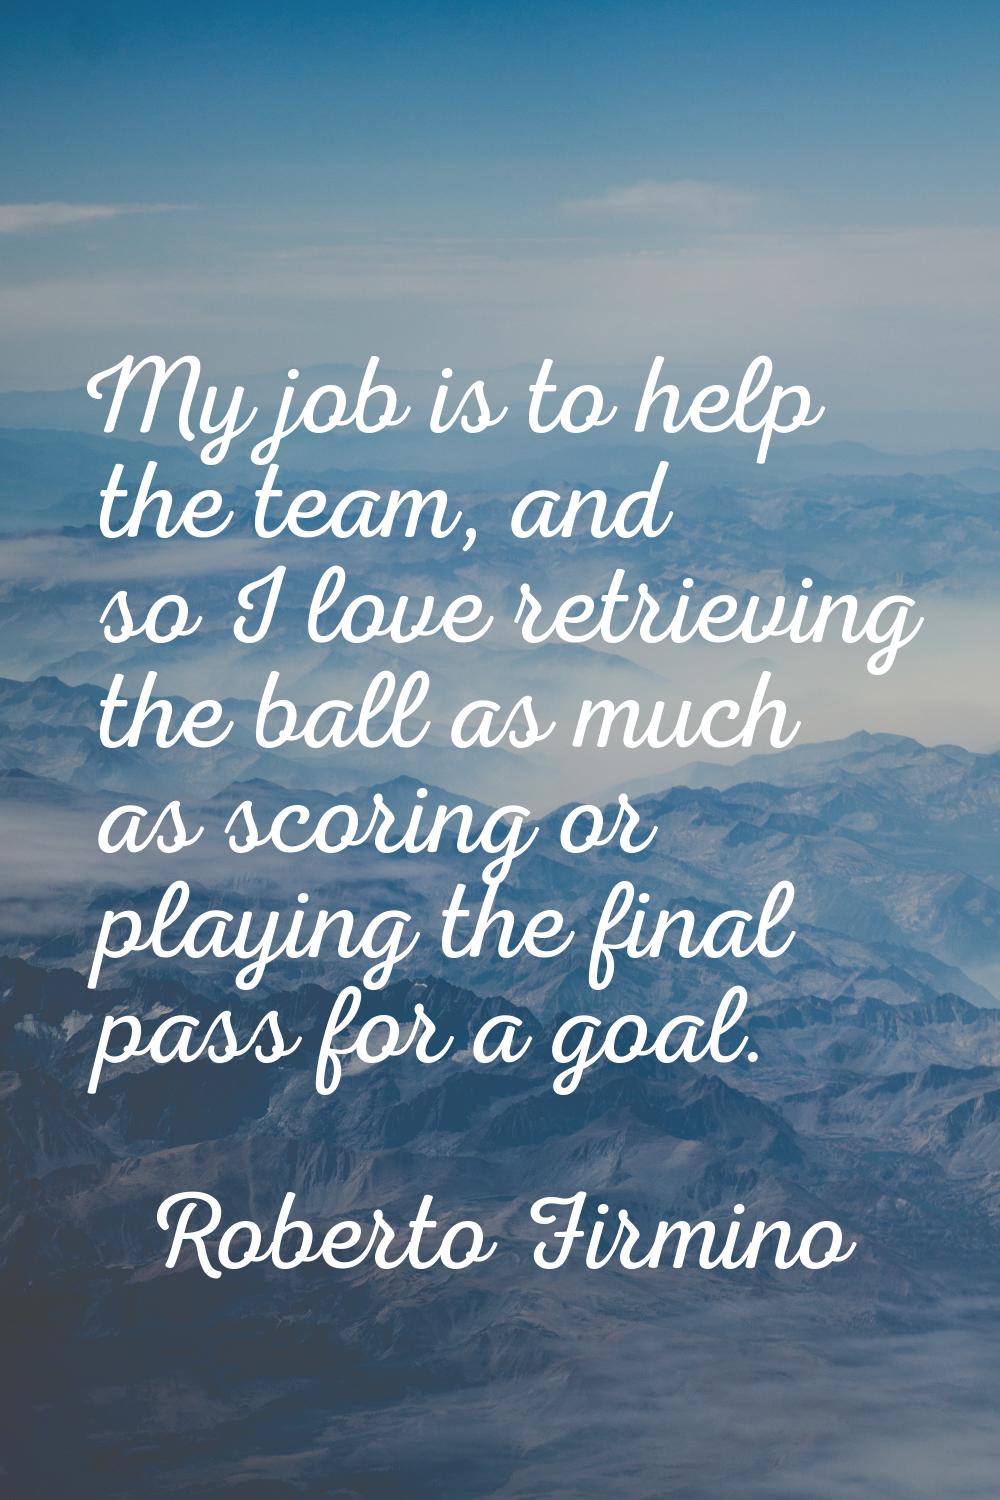 My job is to help the team, and so I love retrieving the ball as much as scoring or playing the fin